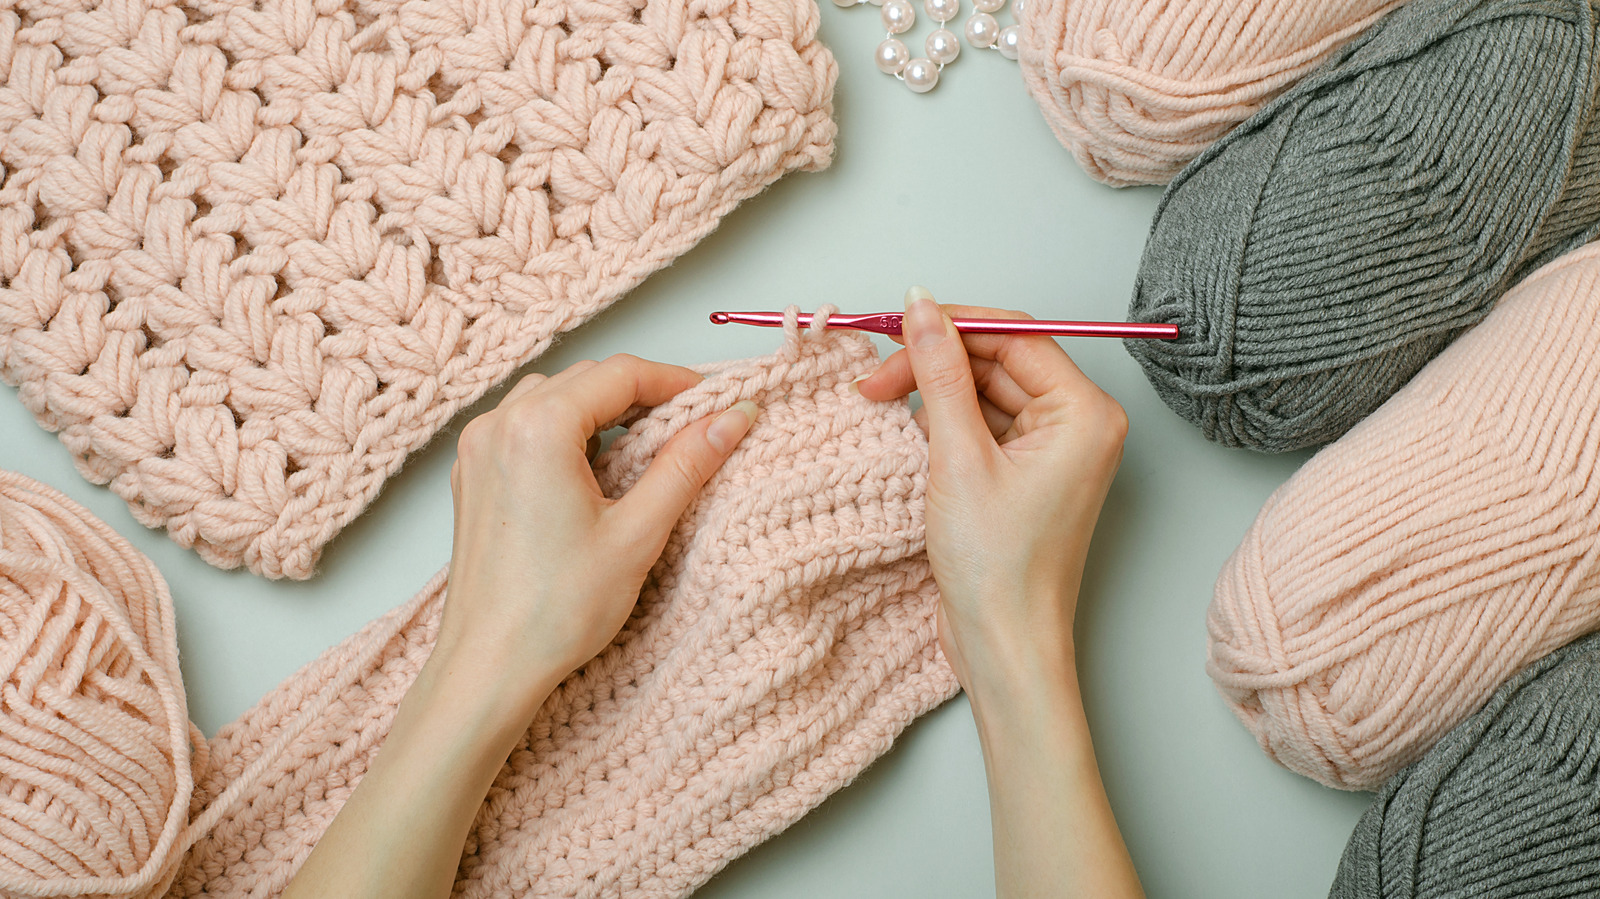 https://www.thelist.com/img/gallery/why-knitting-and-crocheting-are-great-activities-for-your-mental-health/l-intro-1628774167.jpg